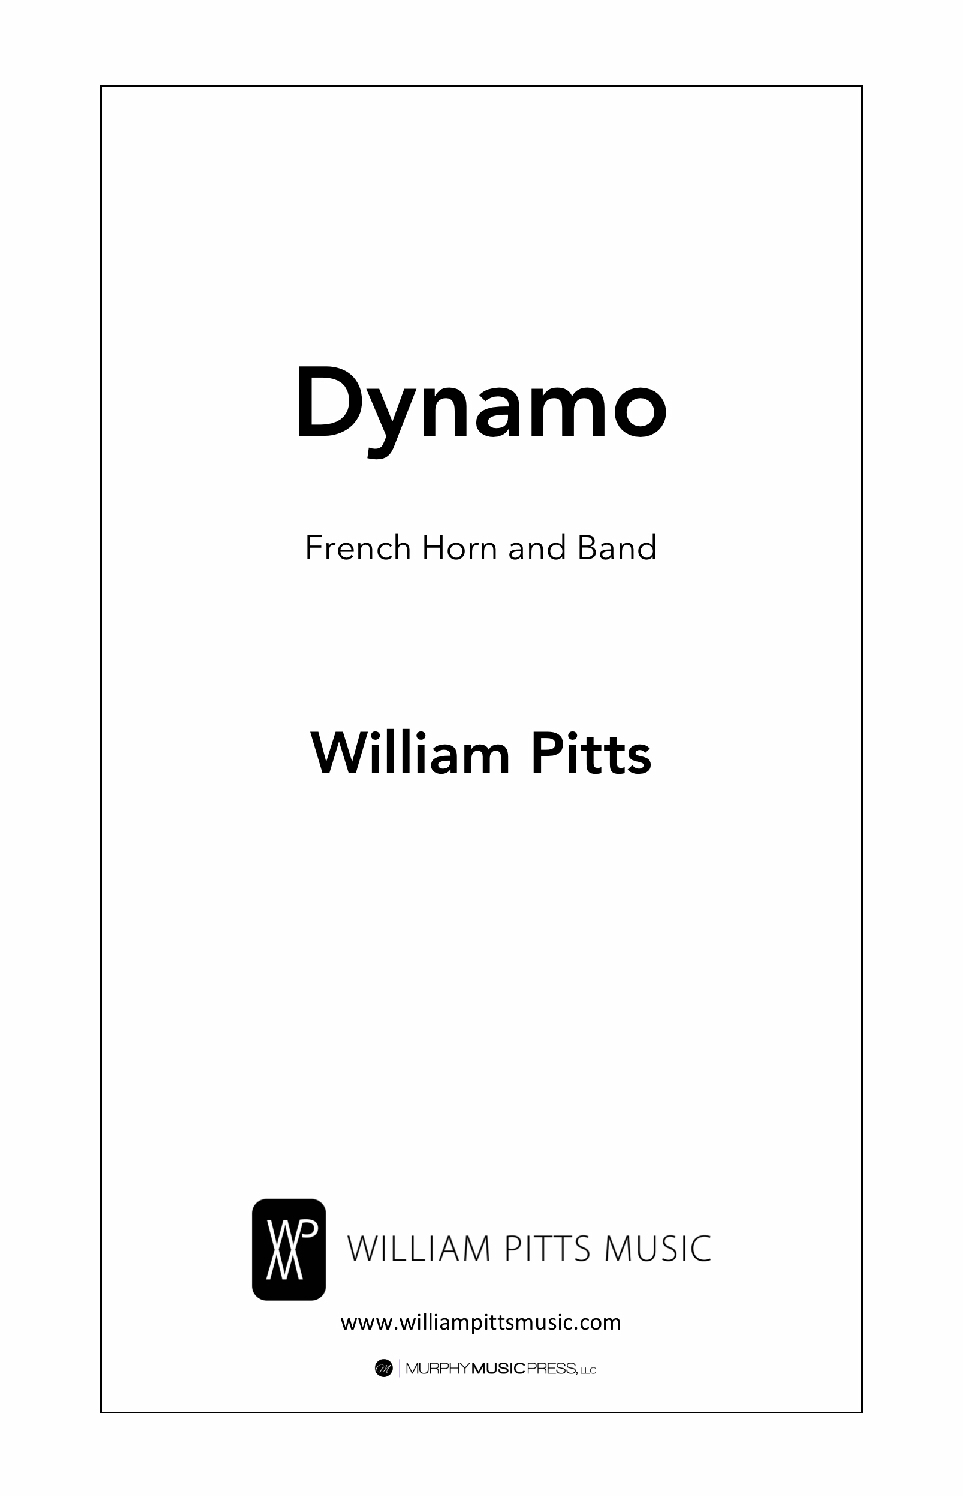 Dynamo by Will Pitts